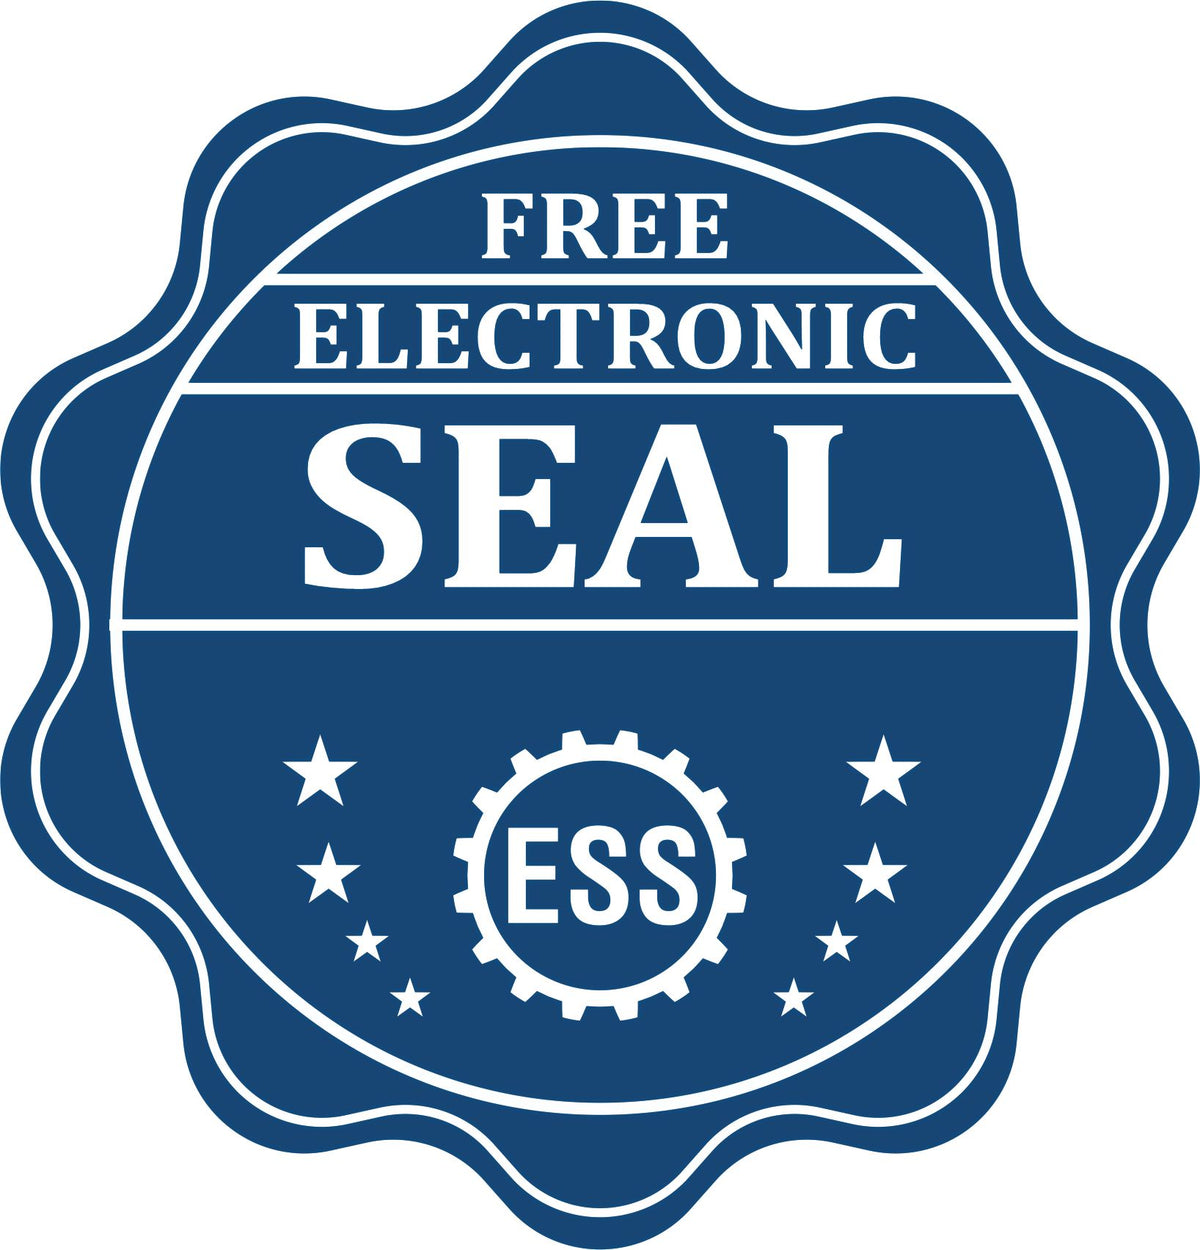 A badge showing a free electronic seal for the Gift Utah Landscape Architect Seal with stars and the ESS gear on the emblem.